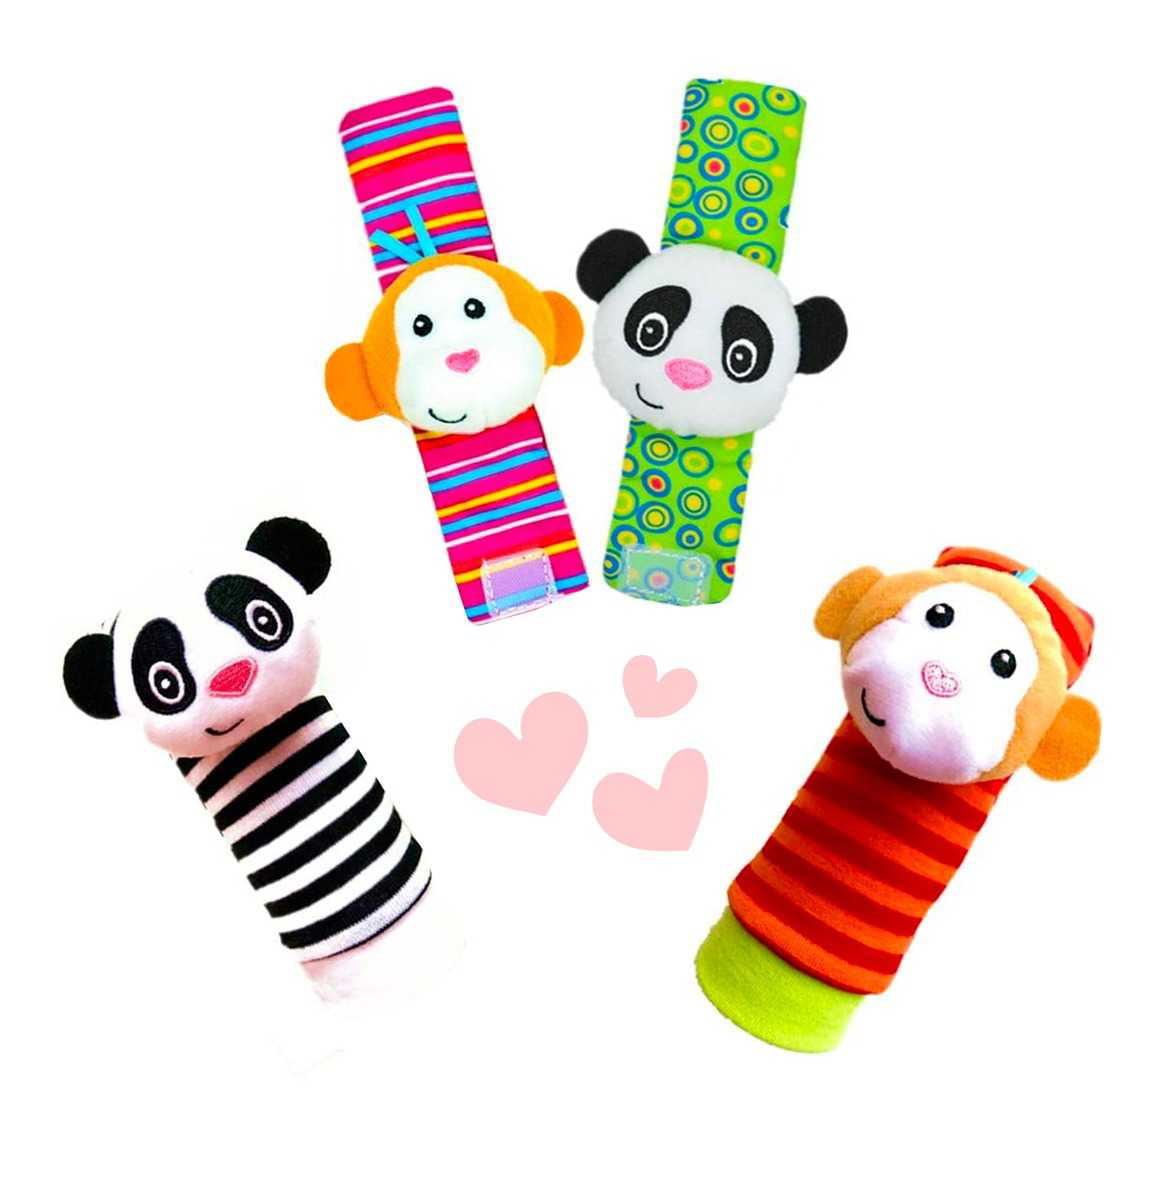 wrist toys for babies